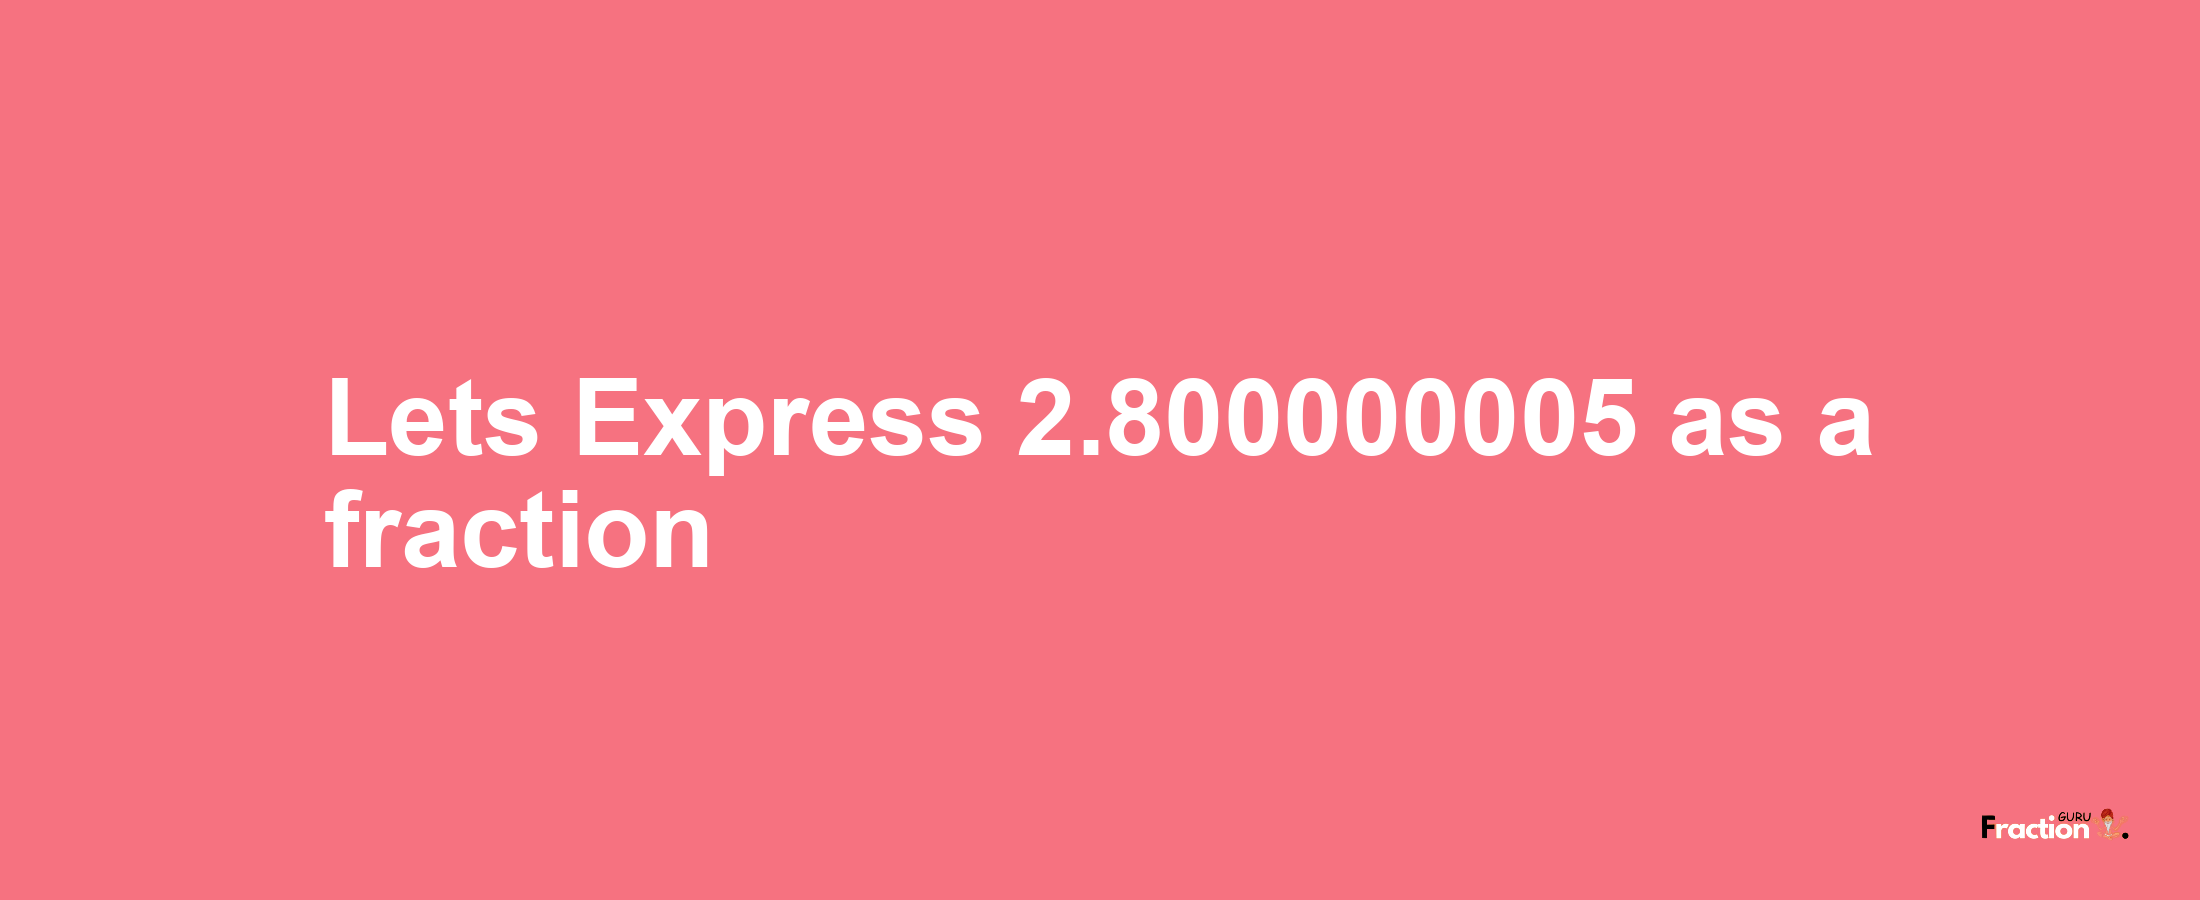 Lets Express 2.800000005 as afraction